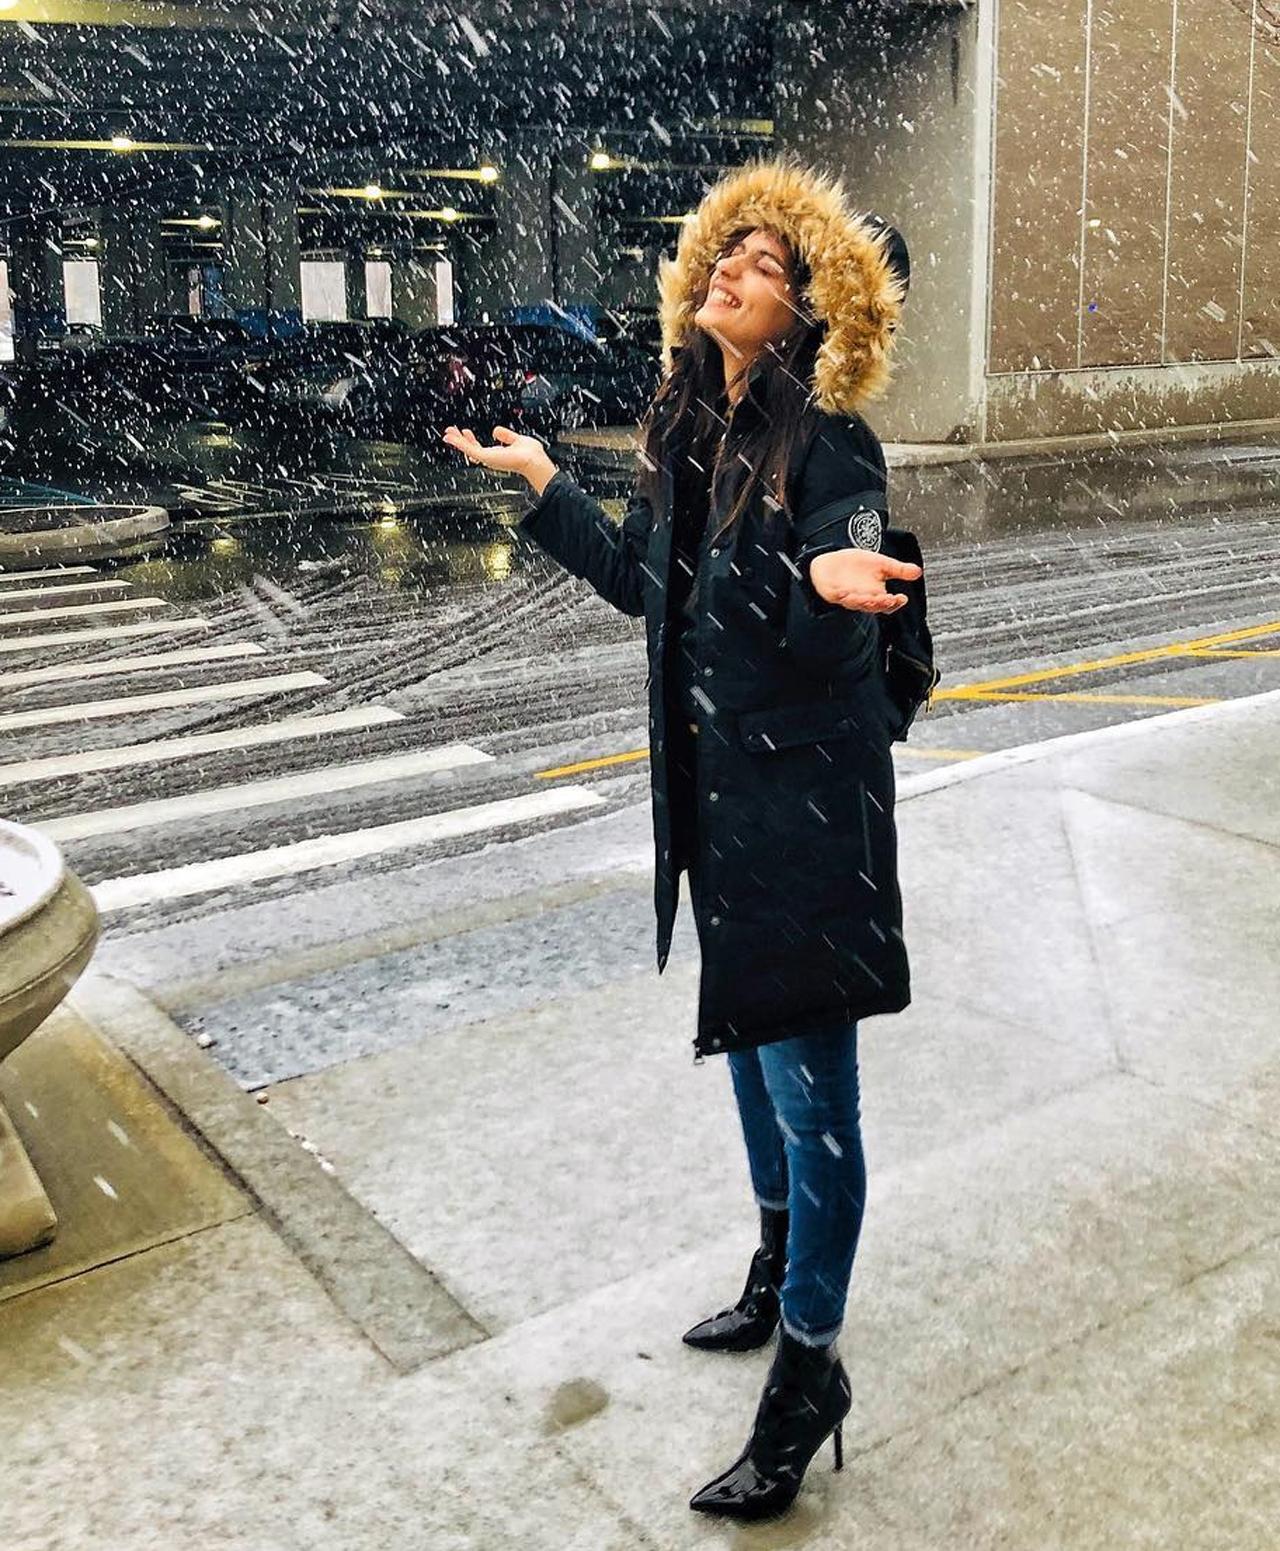 New York
New York's snowfall inspires her somewhat to write one of her longest captions as she enjoys the moment. She pens- 